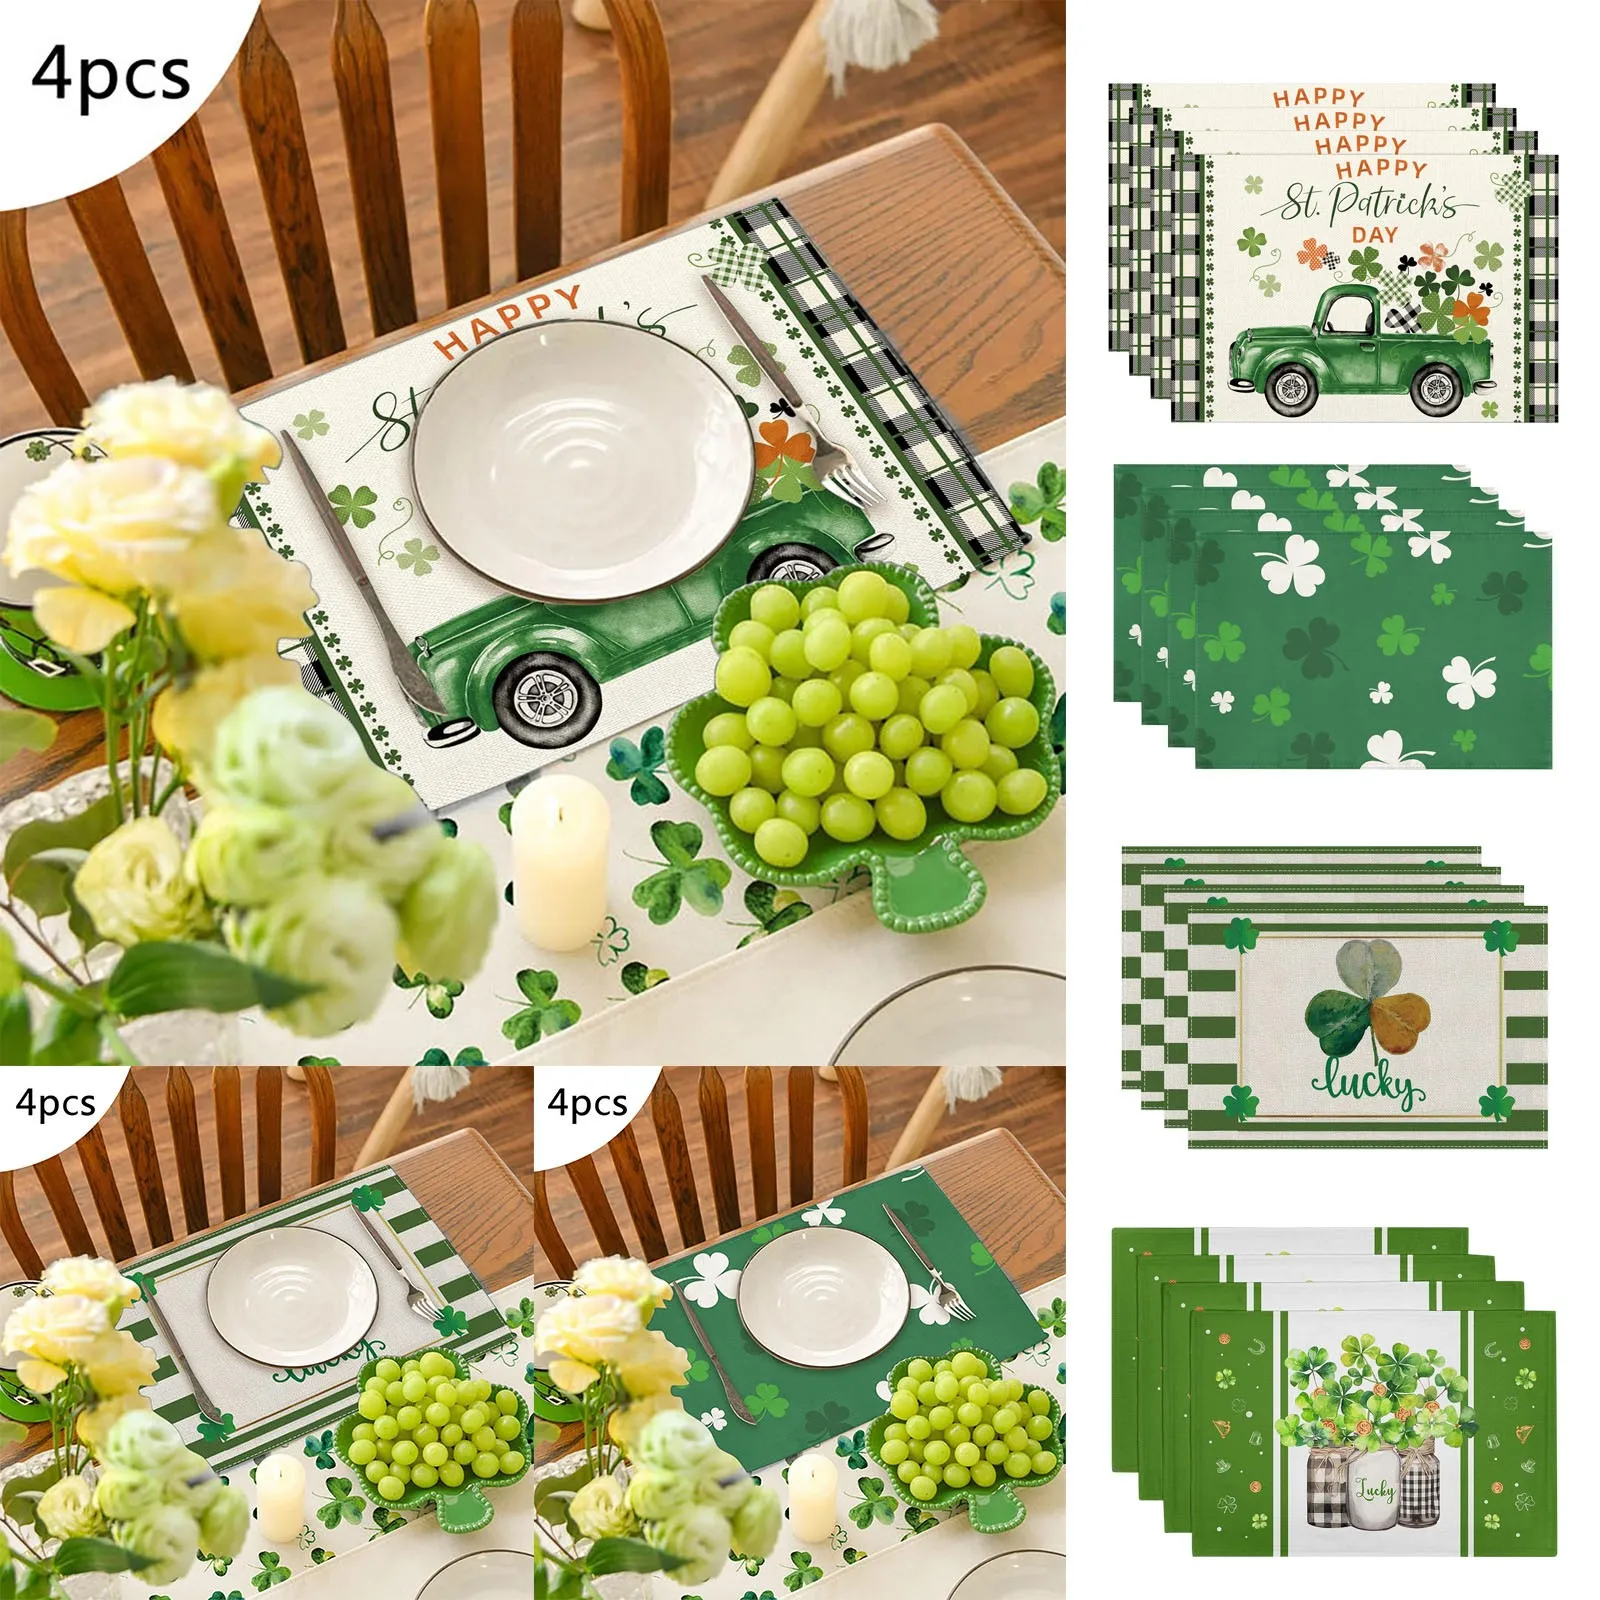 

round Place Mats Indoor Dining 4PCS St. Patrick's Day Placemat Green Table Decoration Non Slip Insulated Linen Table Rubber Mat